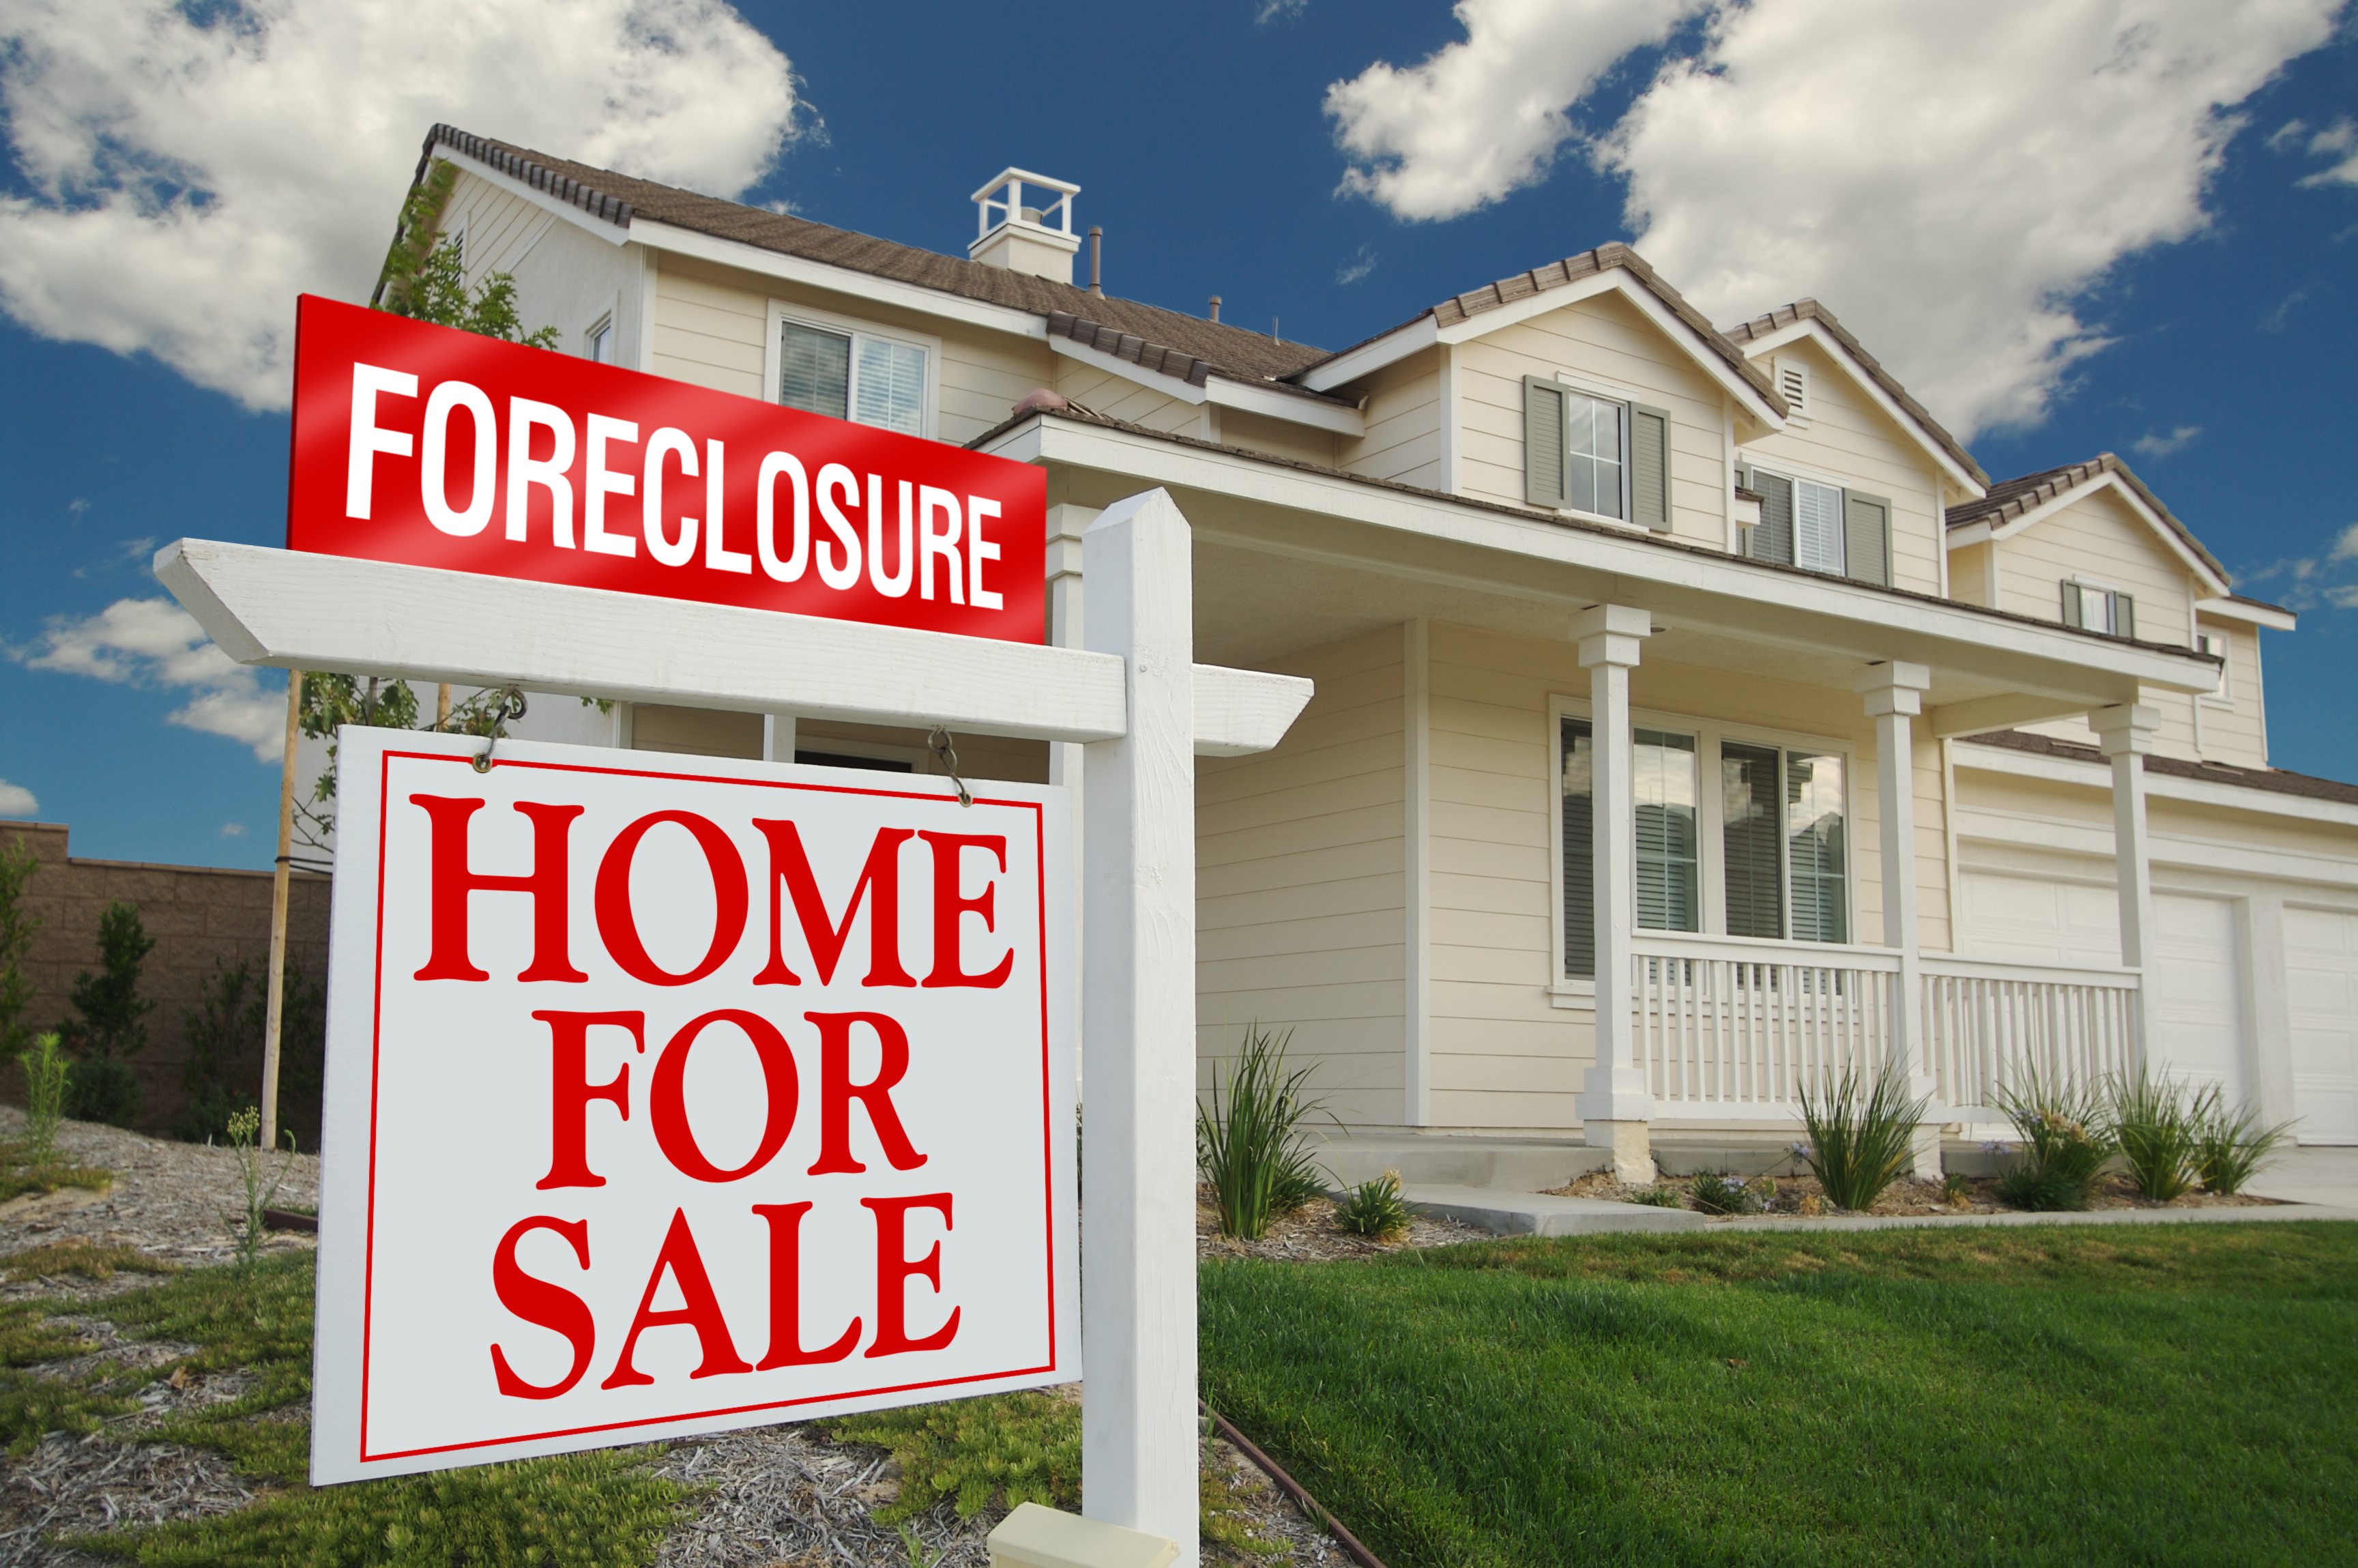 Thinking About Buying a Foreclosure